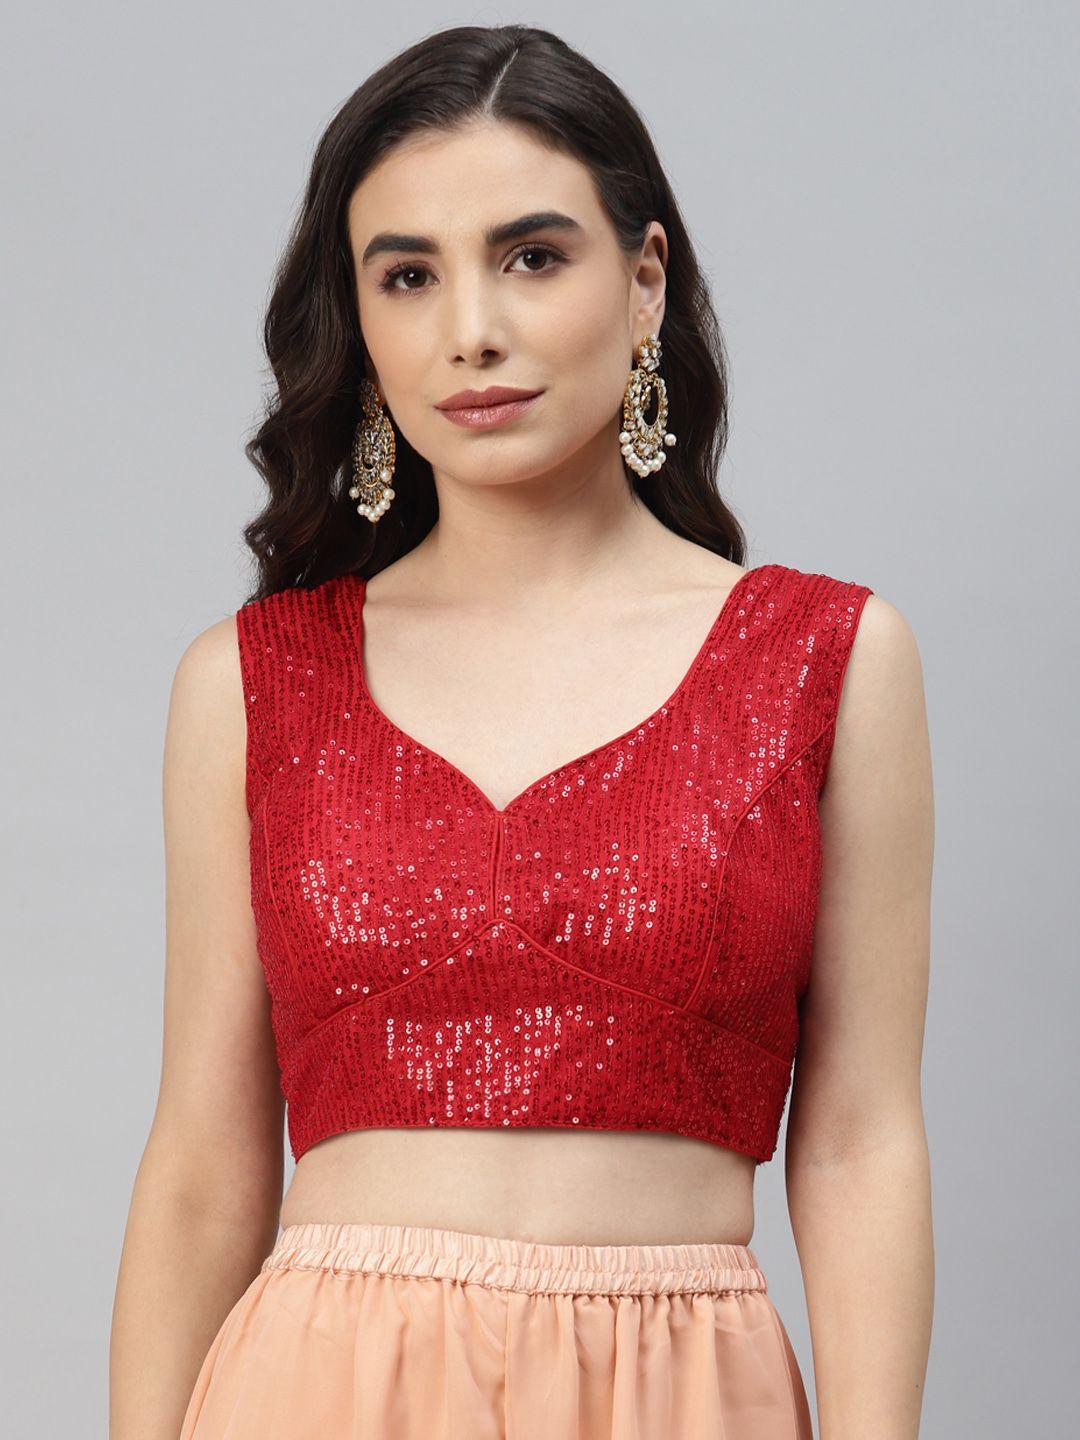 shopgarb-women-red-sequined-padded-saree-blouse